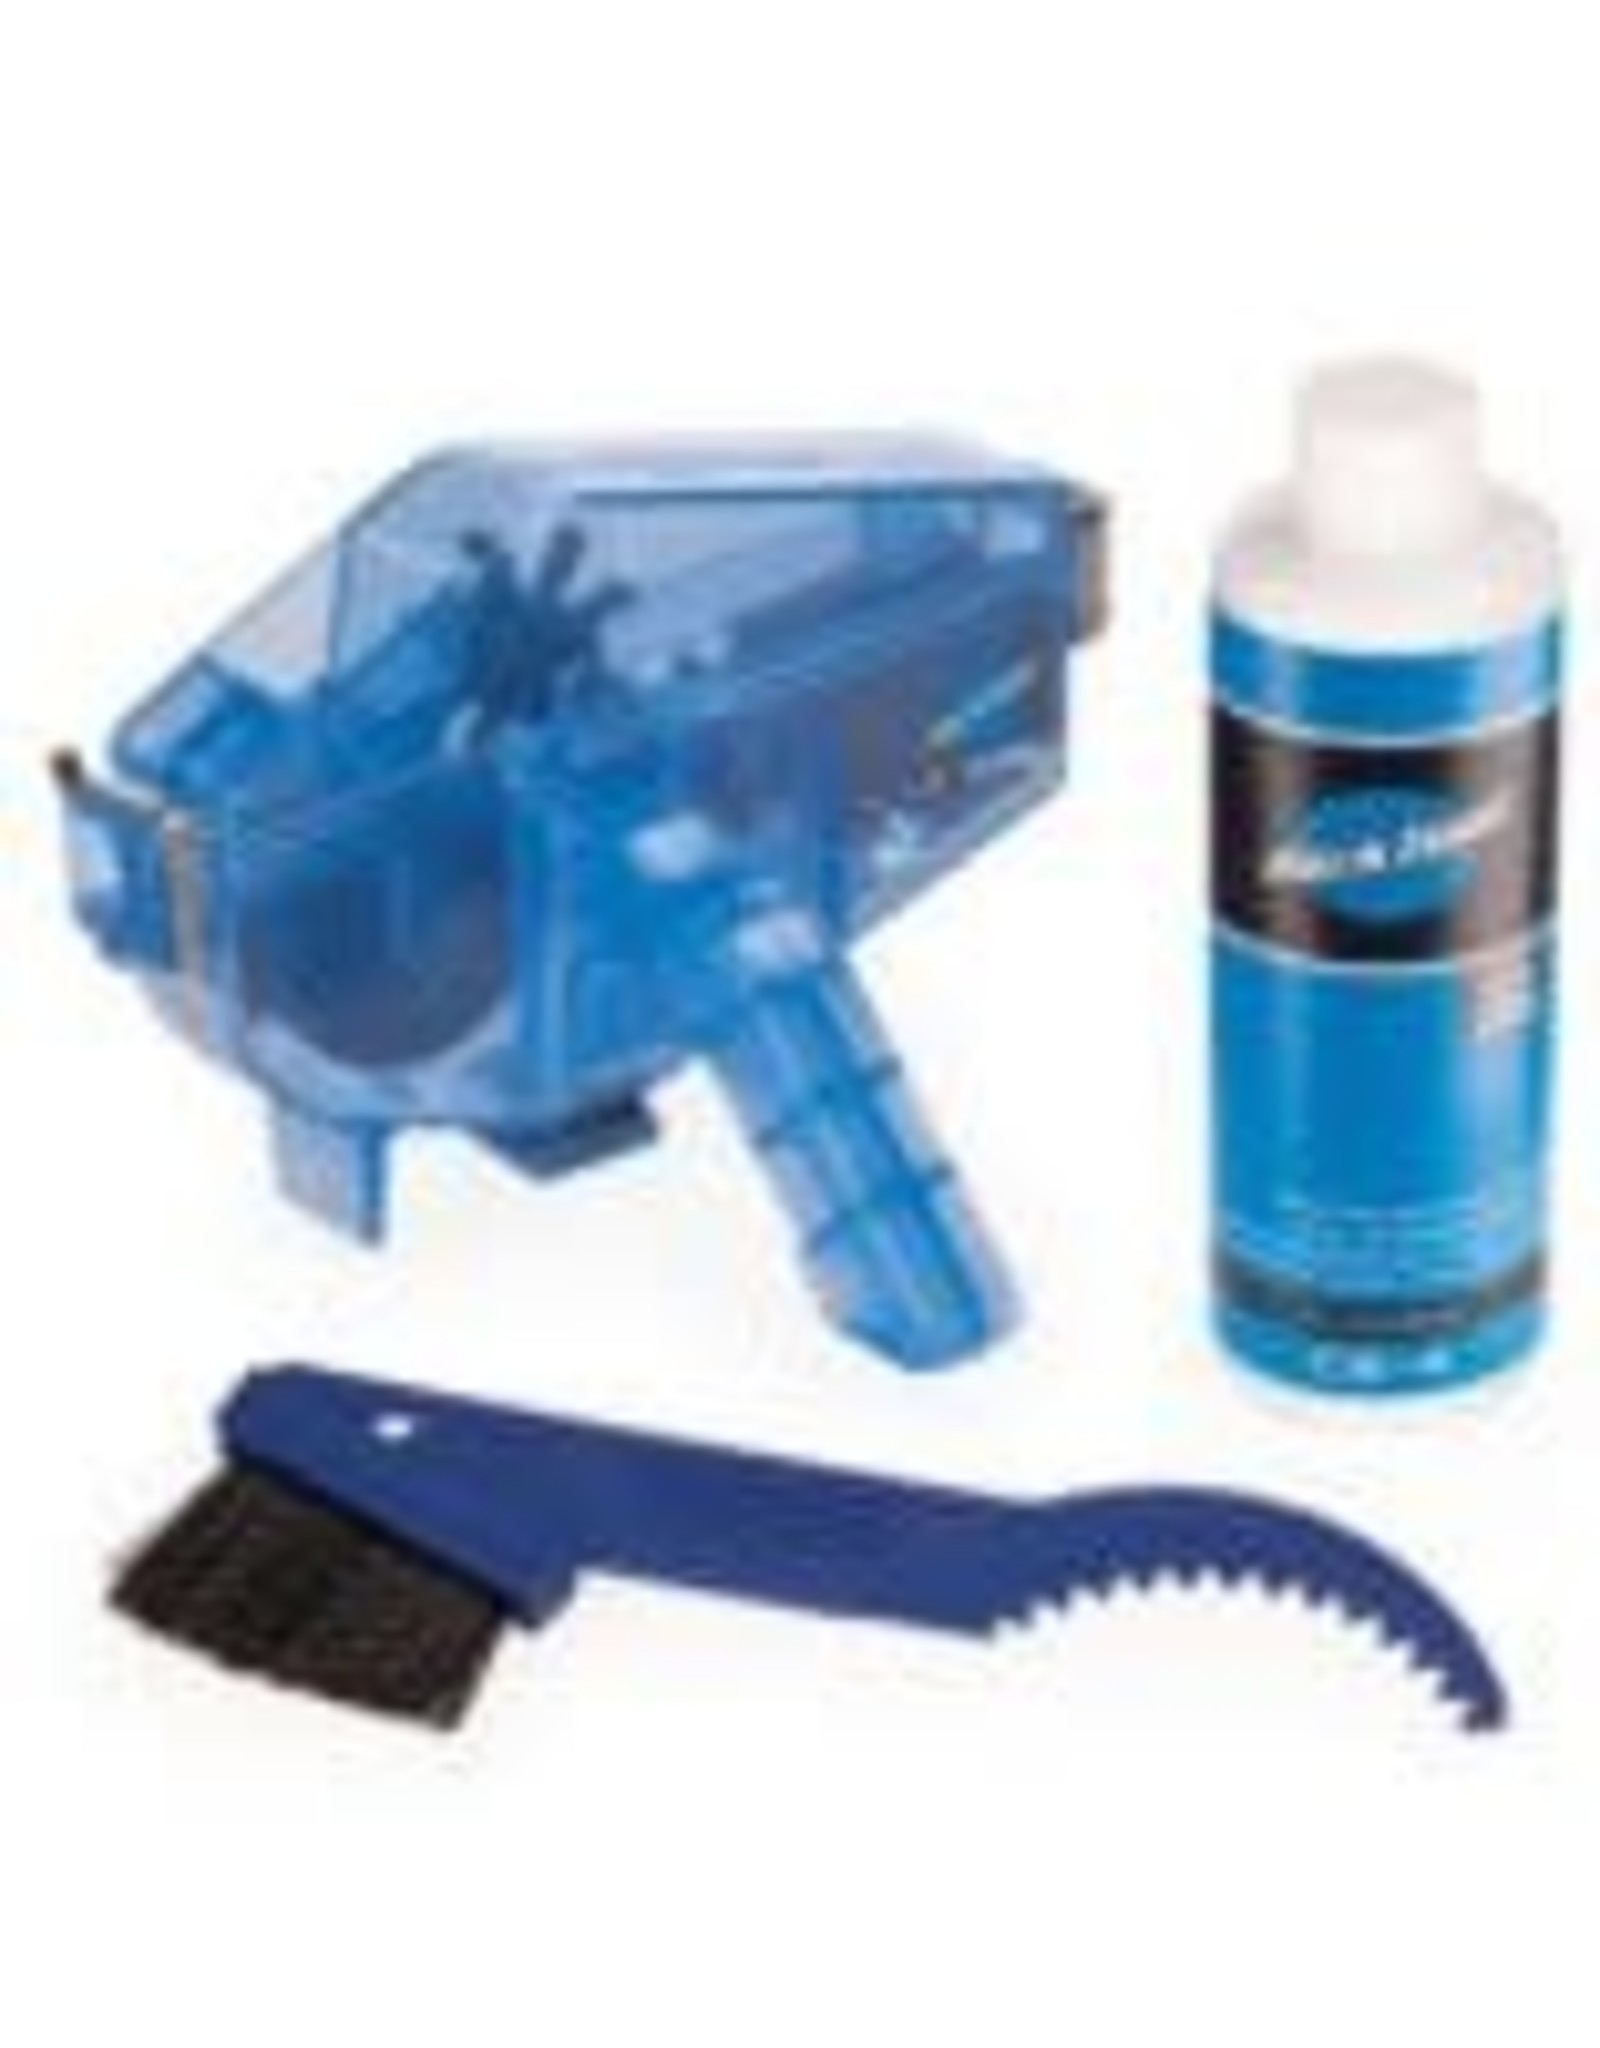 PARK TOOL CLEANING KIT PARKTOOL CG-2.4 CHAIN CLEANING SYSTEM